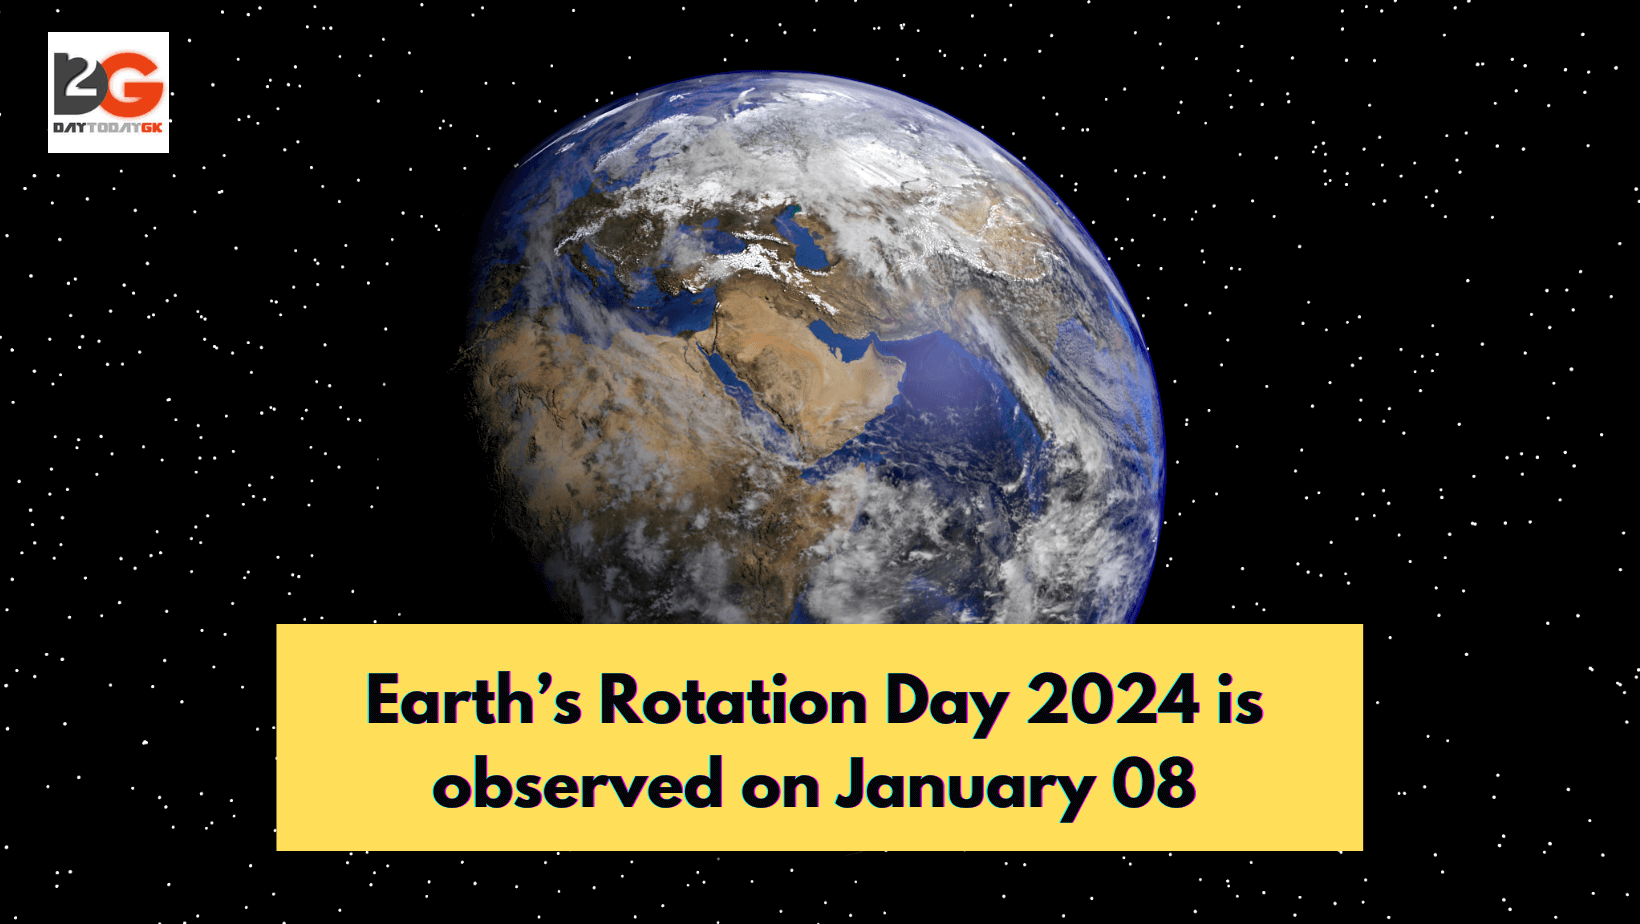 Earth’s Rotation Day 2024 is observed on January 08